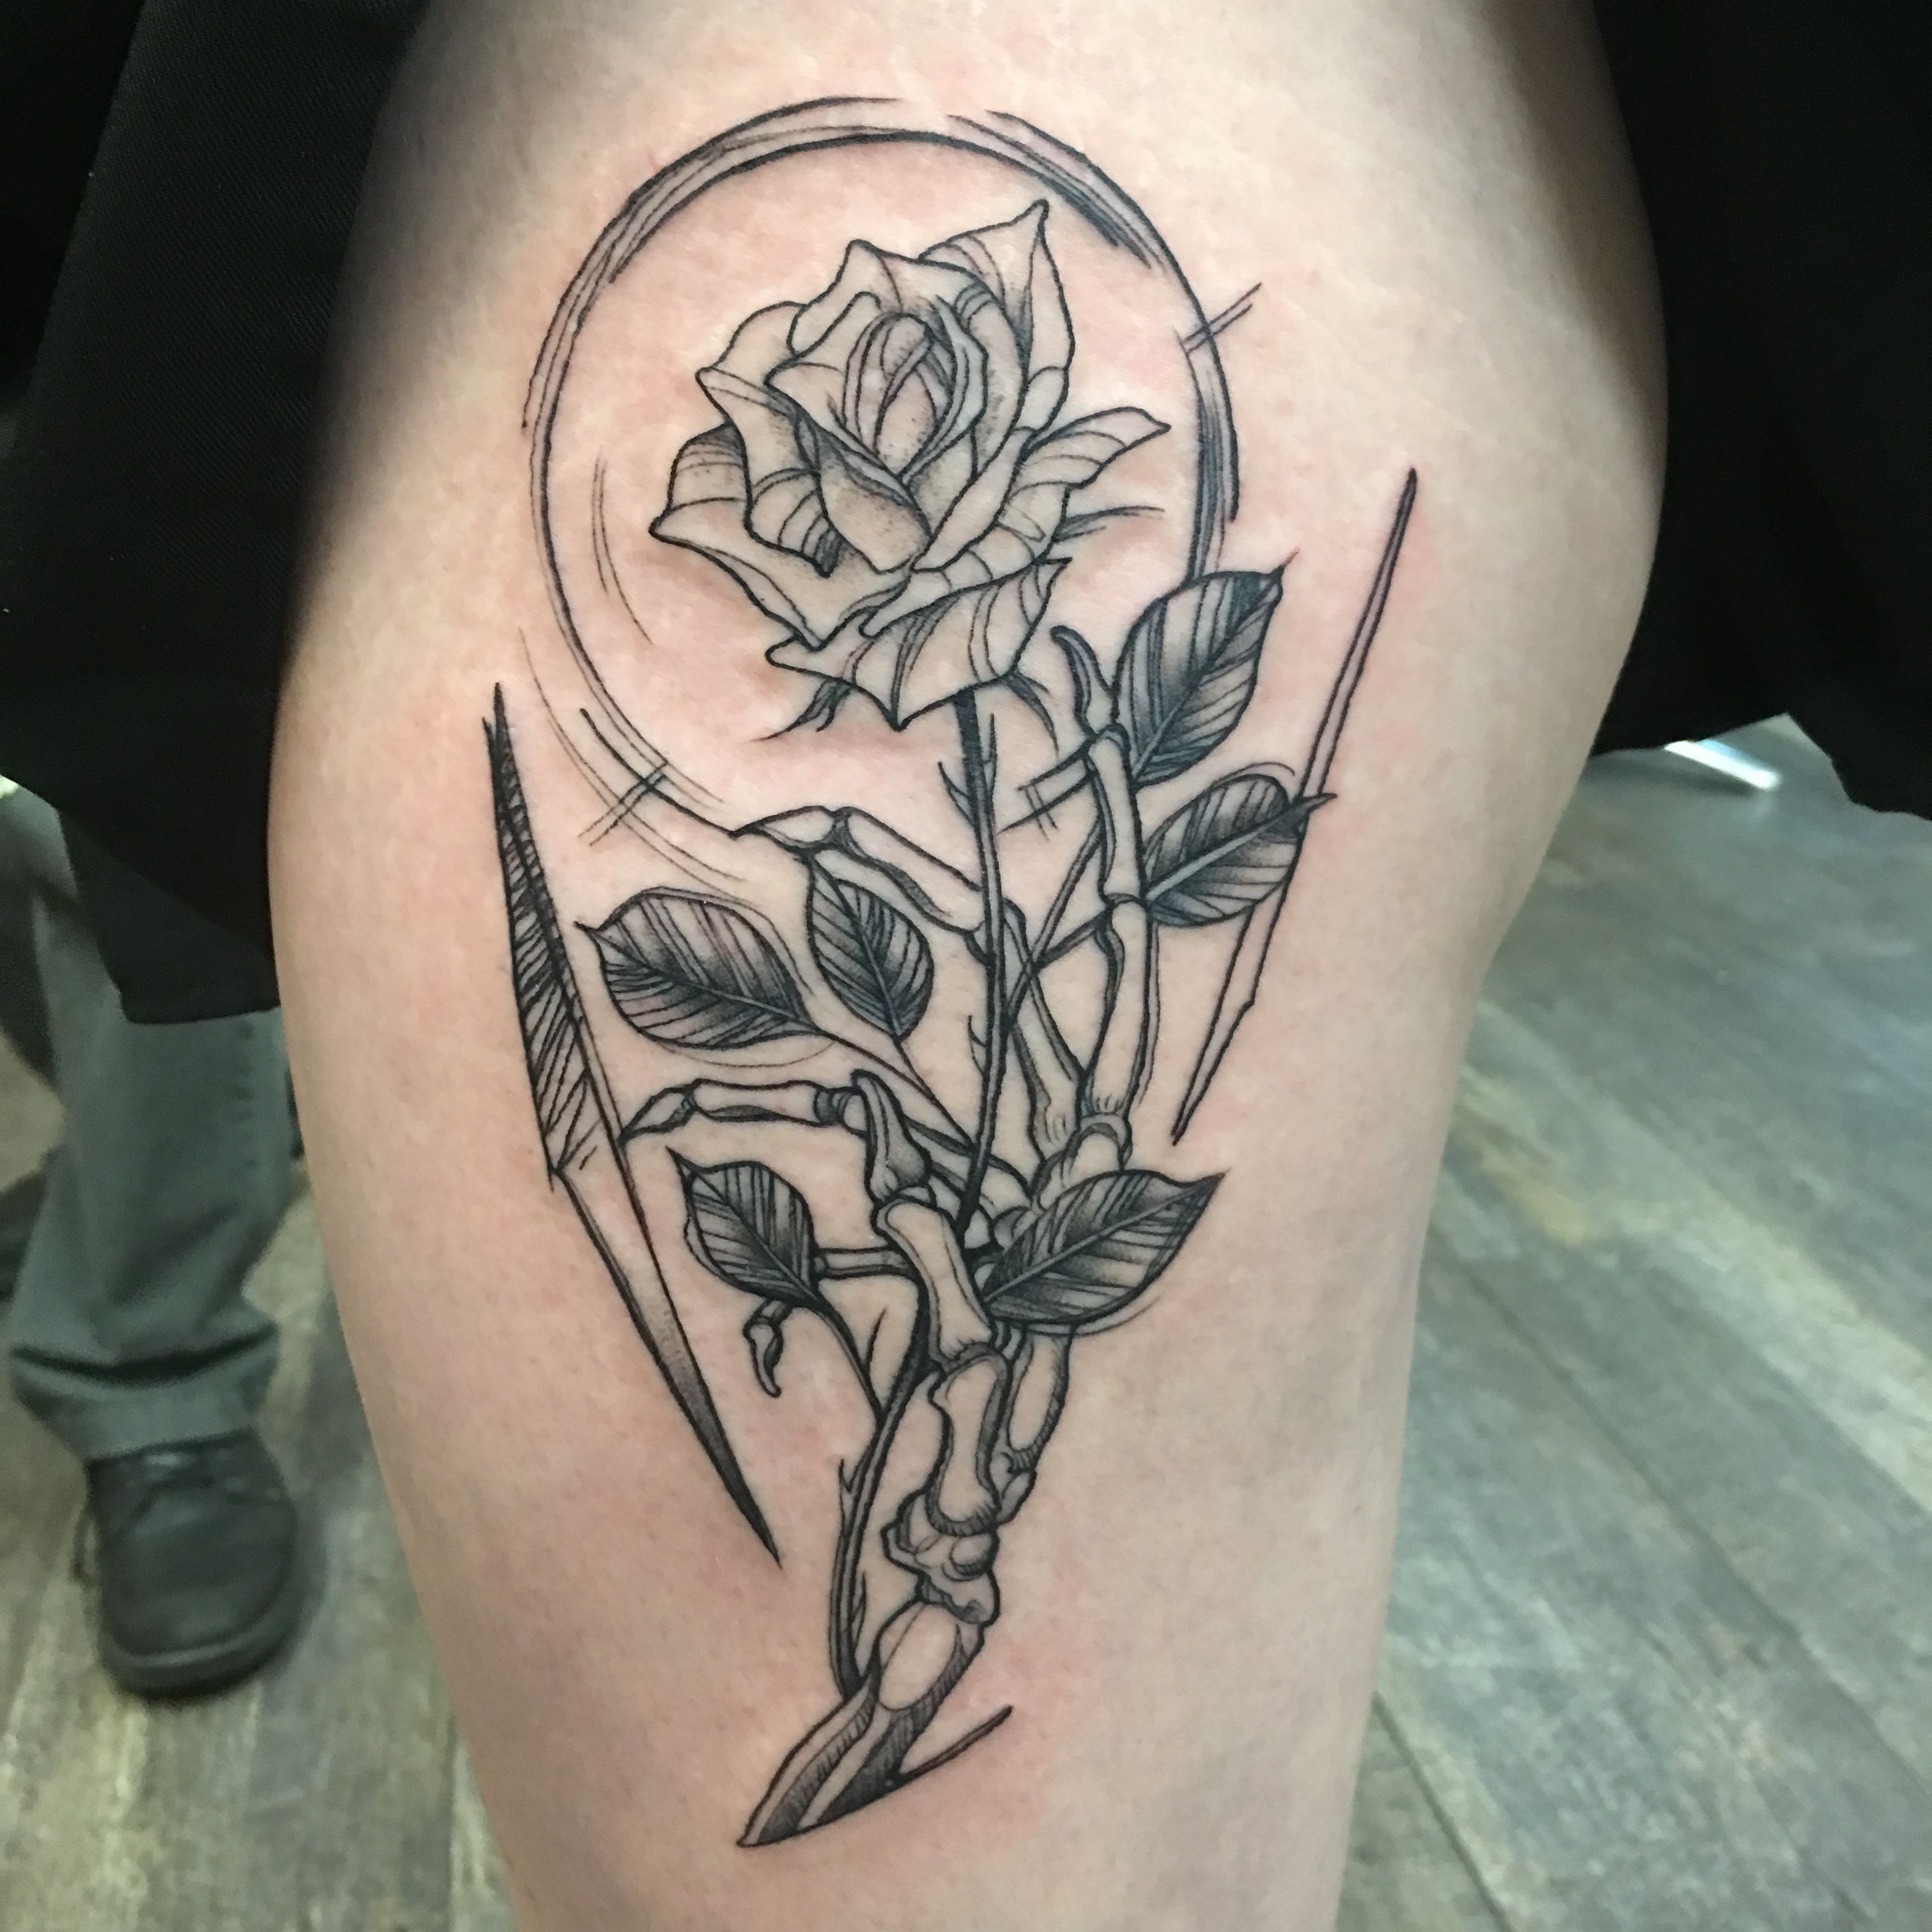 Re did a rose he already had and added the skeleton fingers and shadin   Houston Tattoo  TikTok